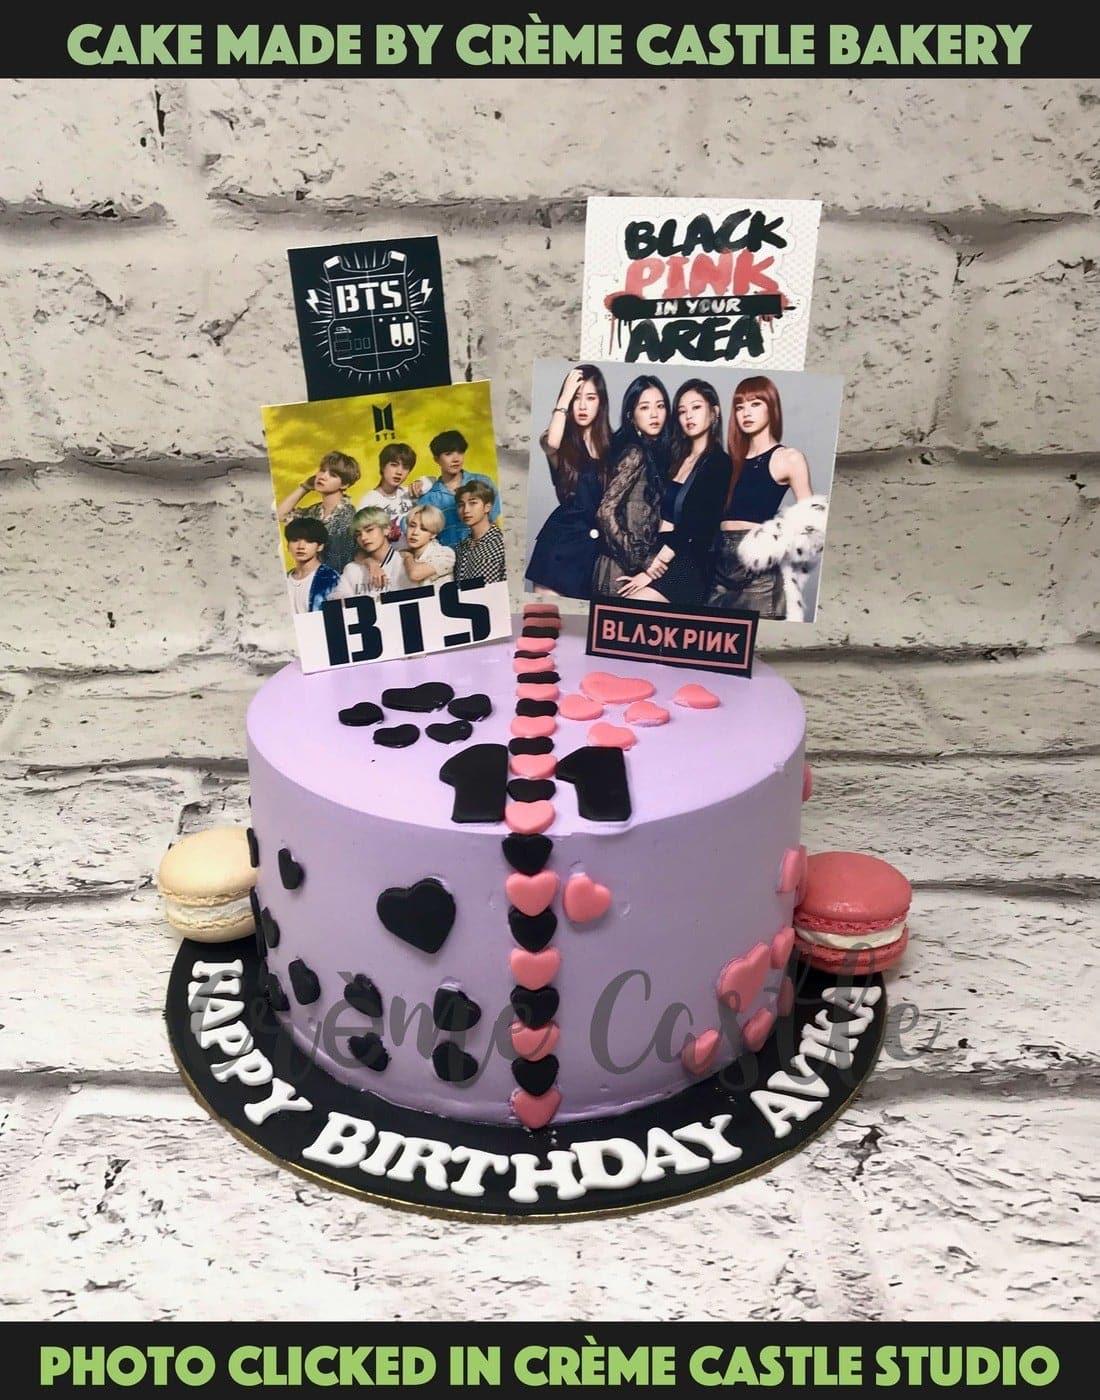 BTS Theme Cake - Cakes and Bakes Stories